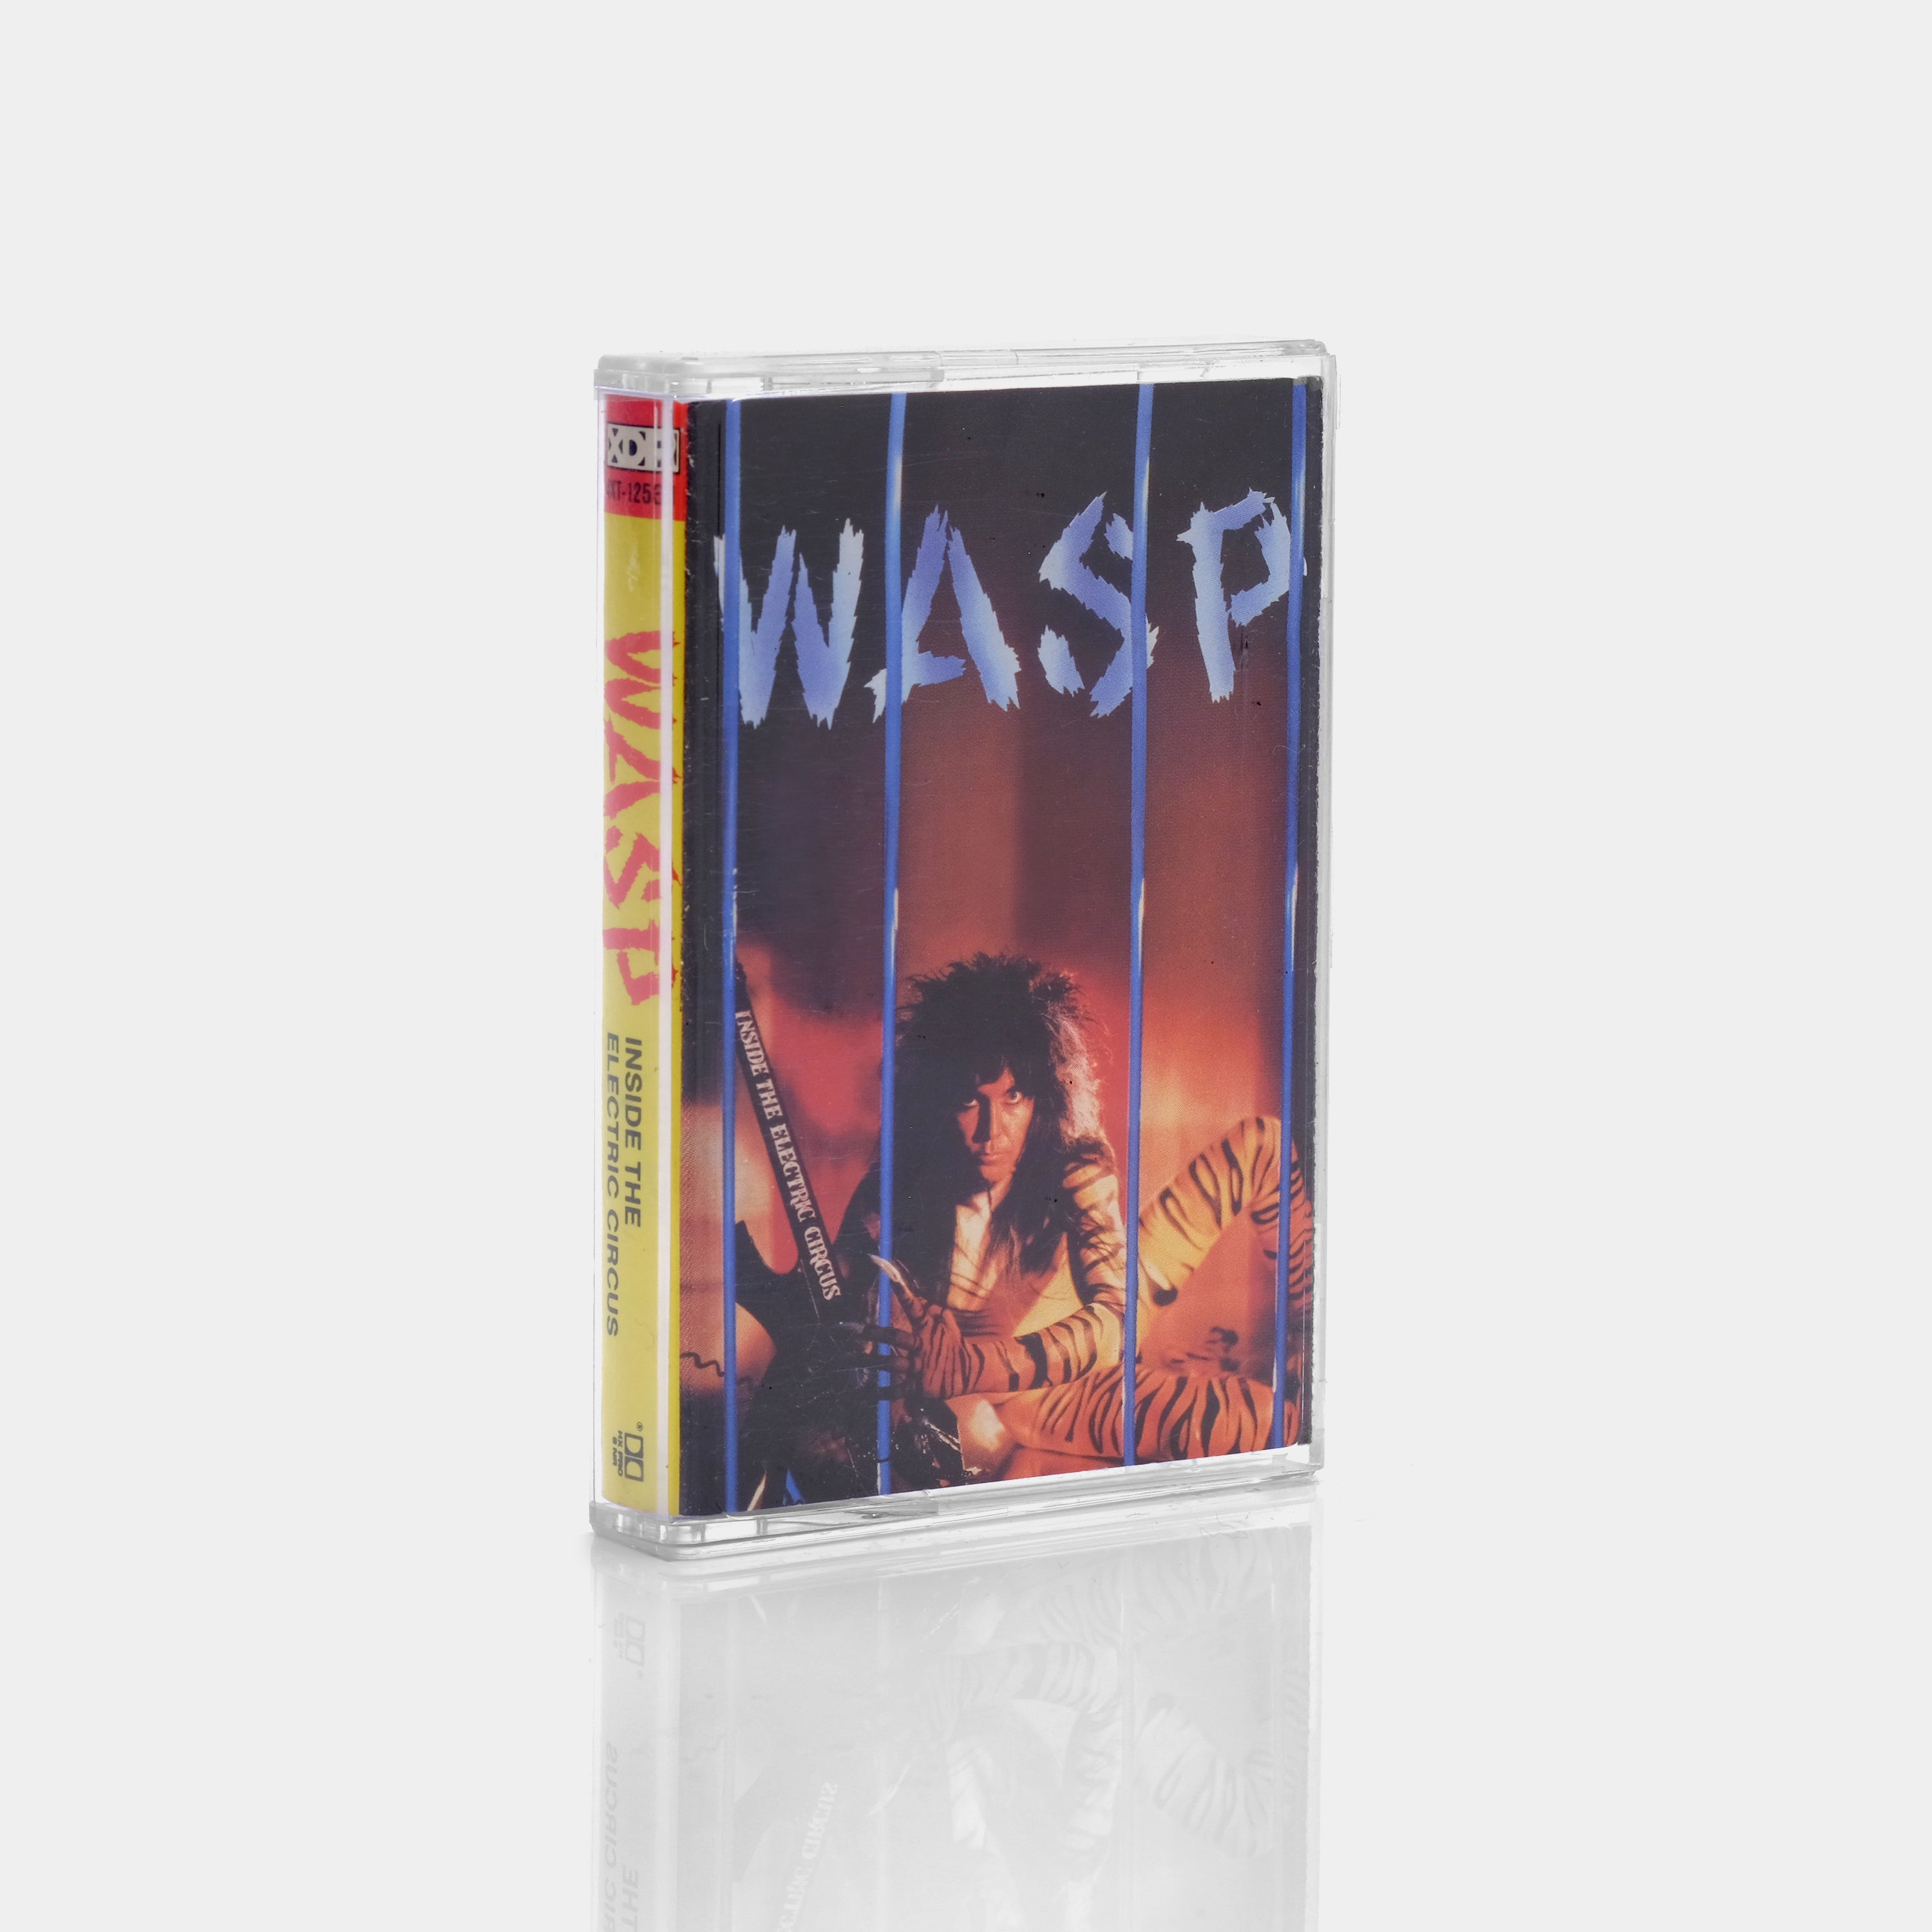 W.A.S.P. - Inside The Electric Circus Cassette Tape